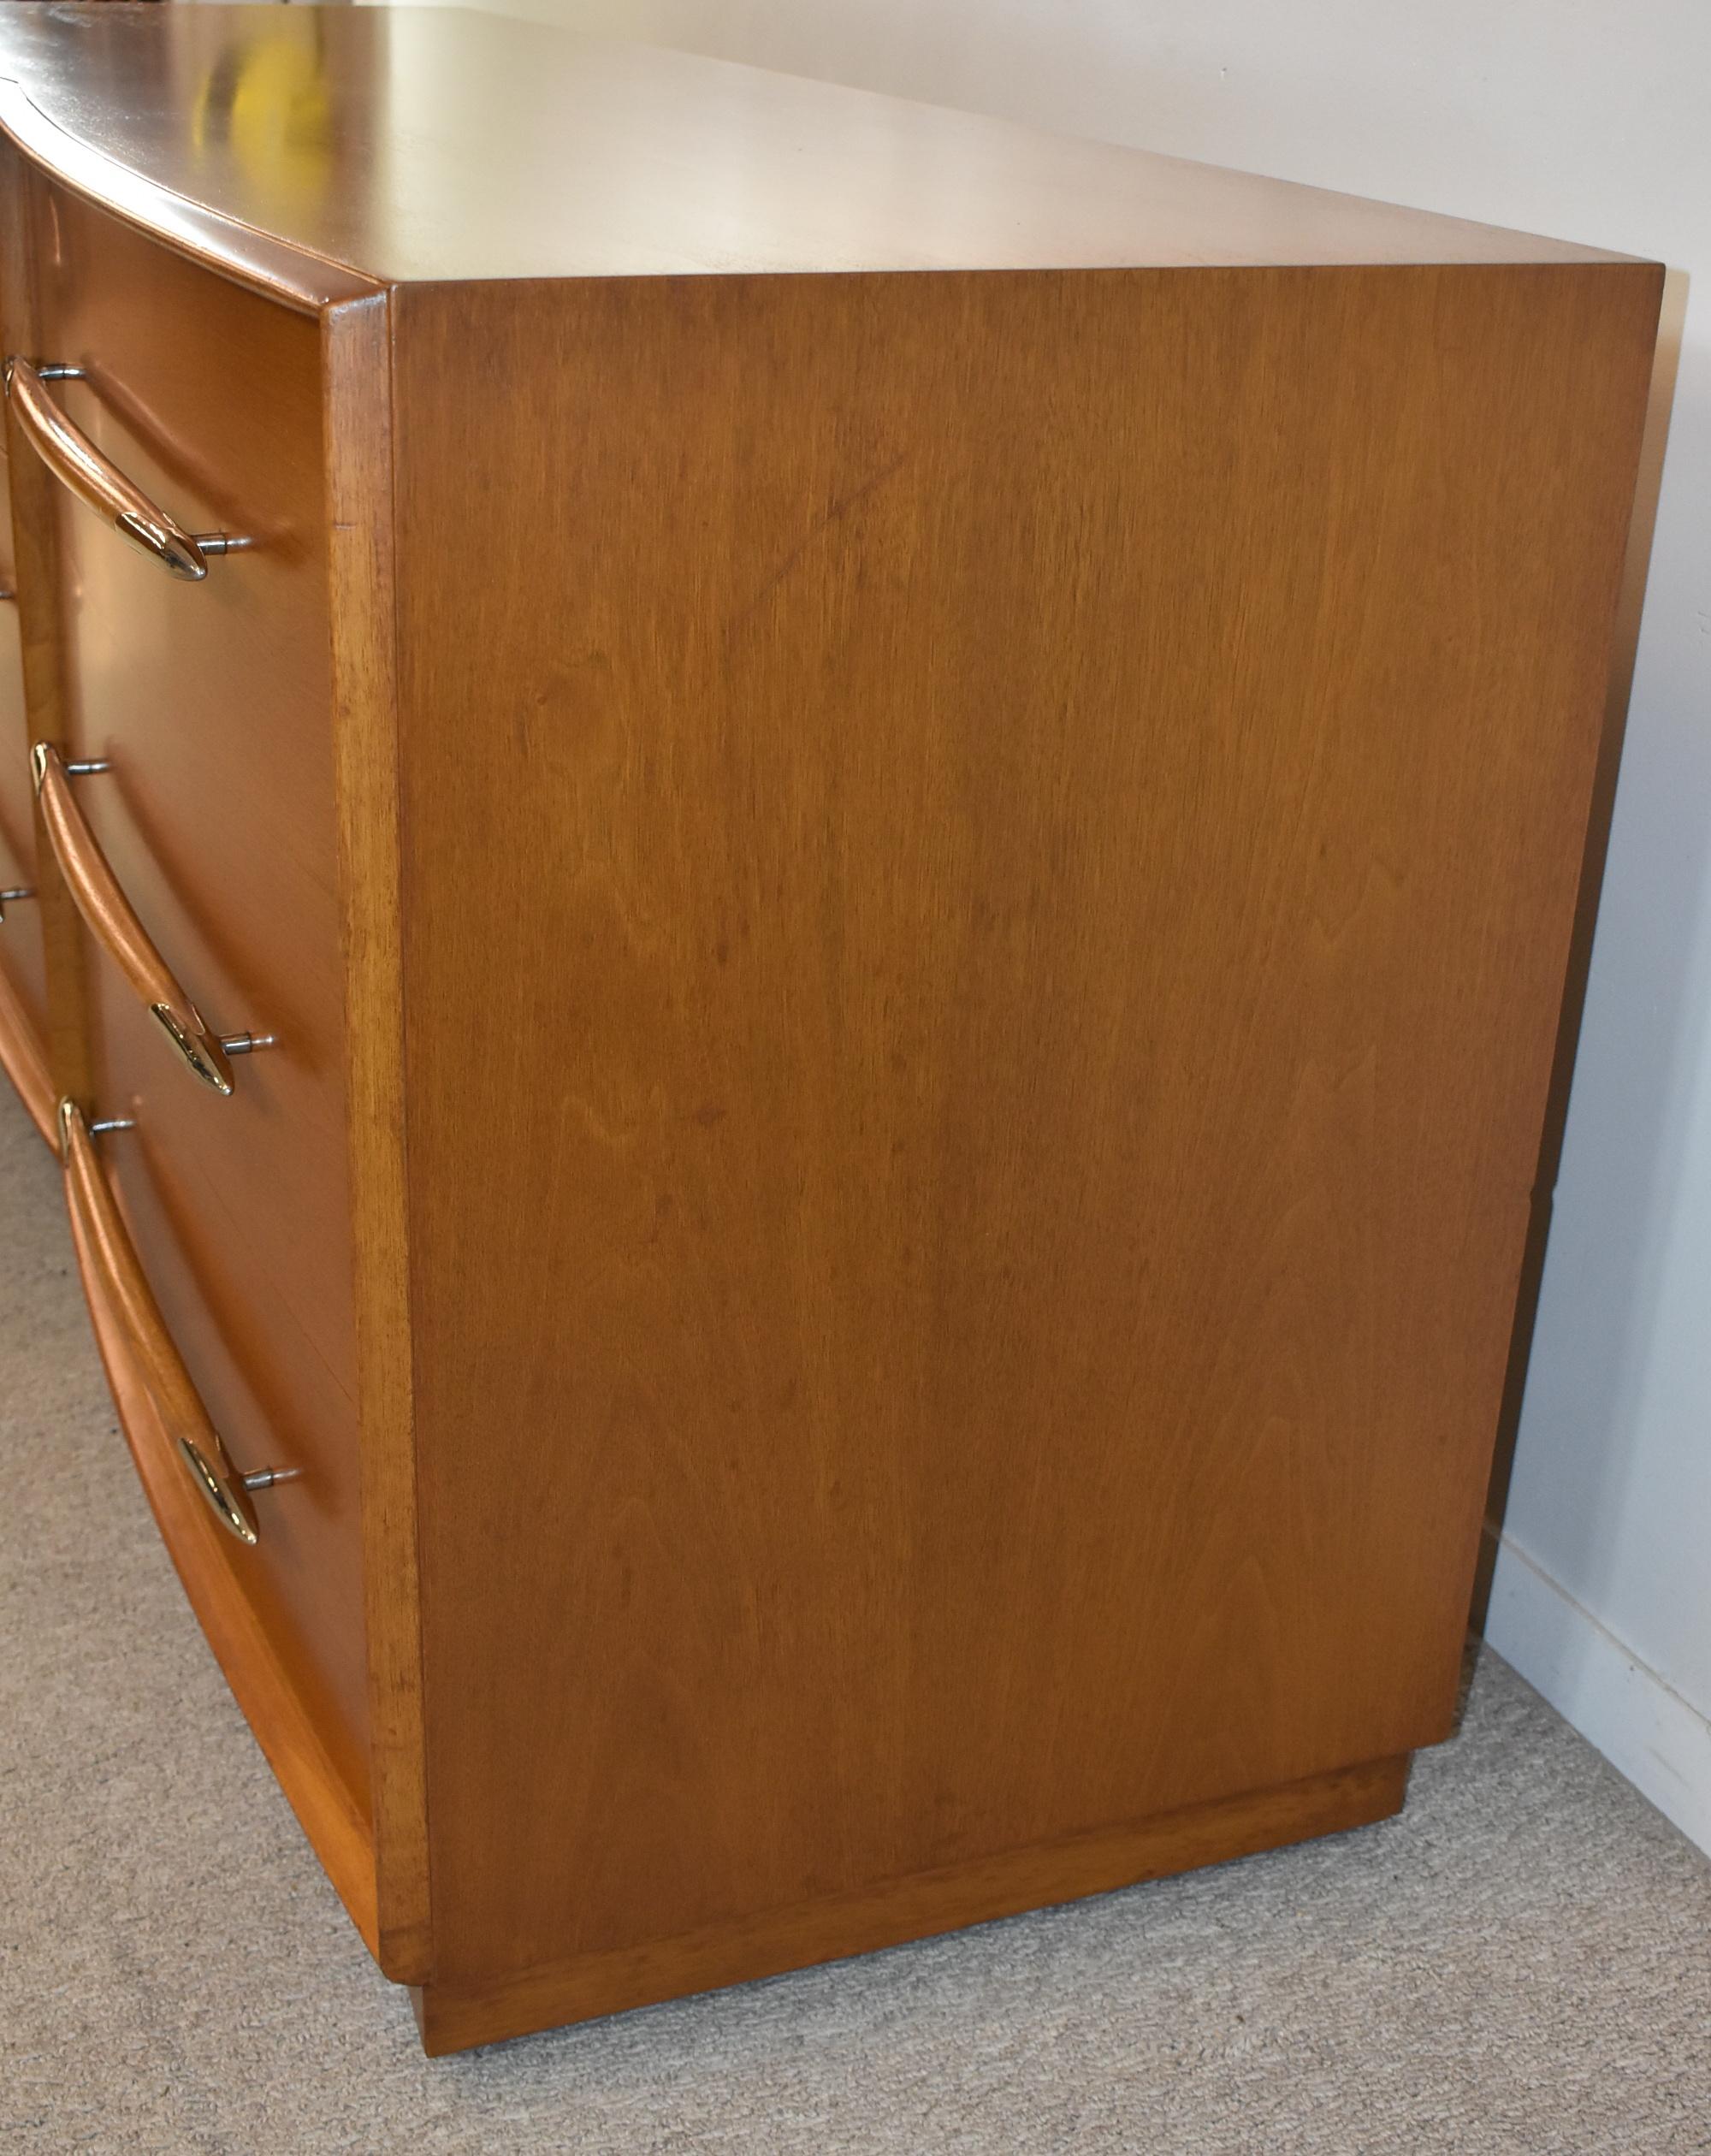 Elegant mid-century modern walnut dresser by T.H. Robsjohn-Gibbings for Widdicomb features a curved front, captivating spear-shaped silver finish tipped pulls, and 6 deep drawers with dividers. 67